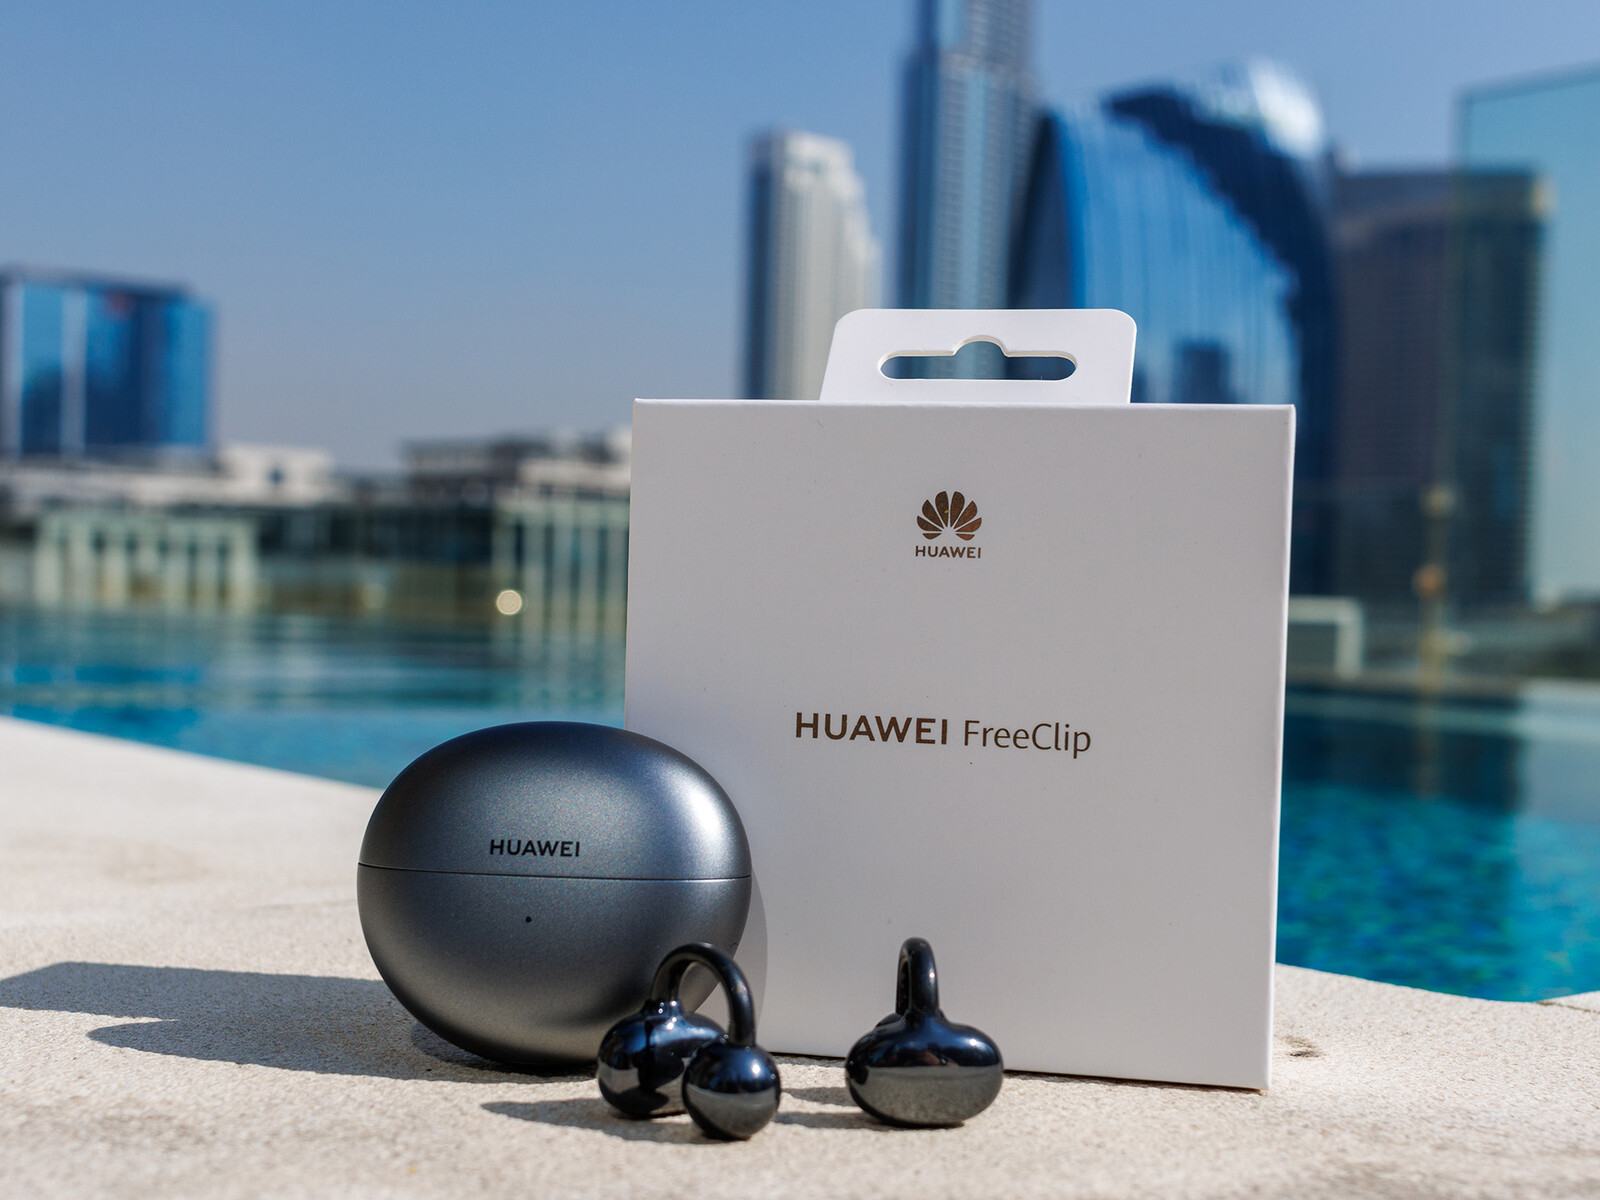 Huawei FreeClip review - Open-ear headphones with an innovative design -   Reviews